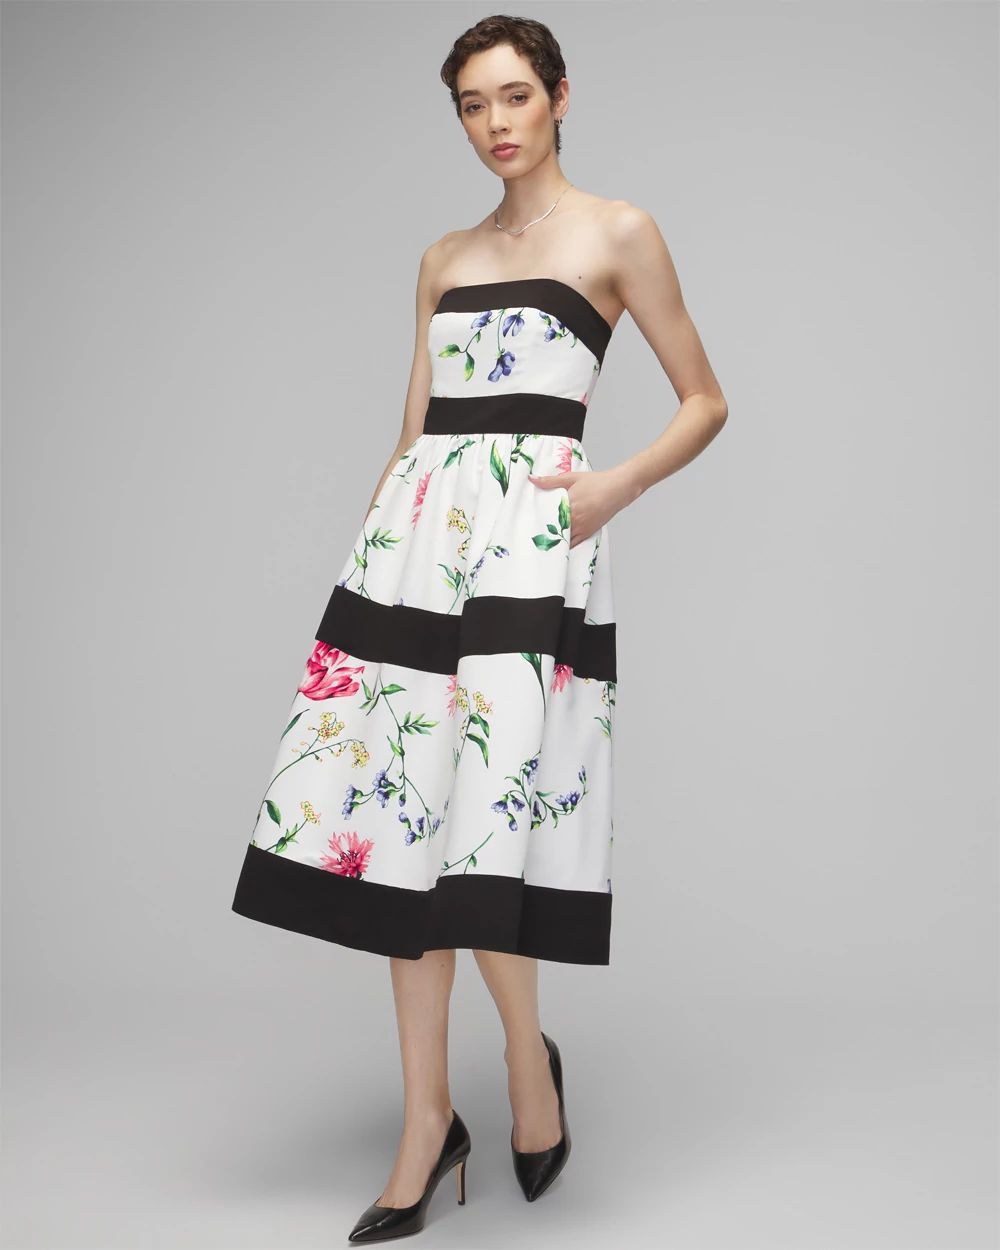 Petite Strapless Floral Contrast Fit & Flare Dress